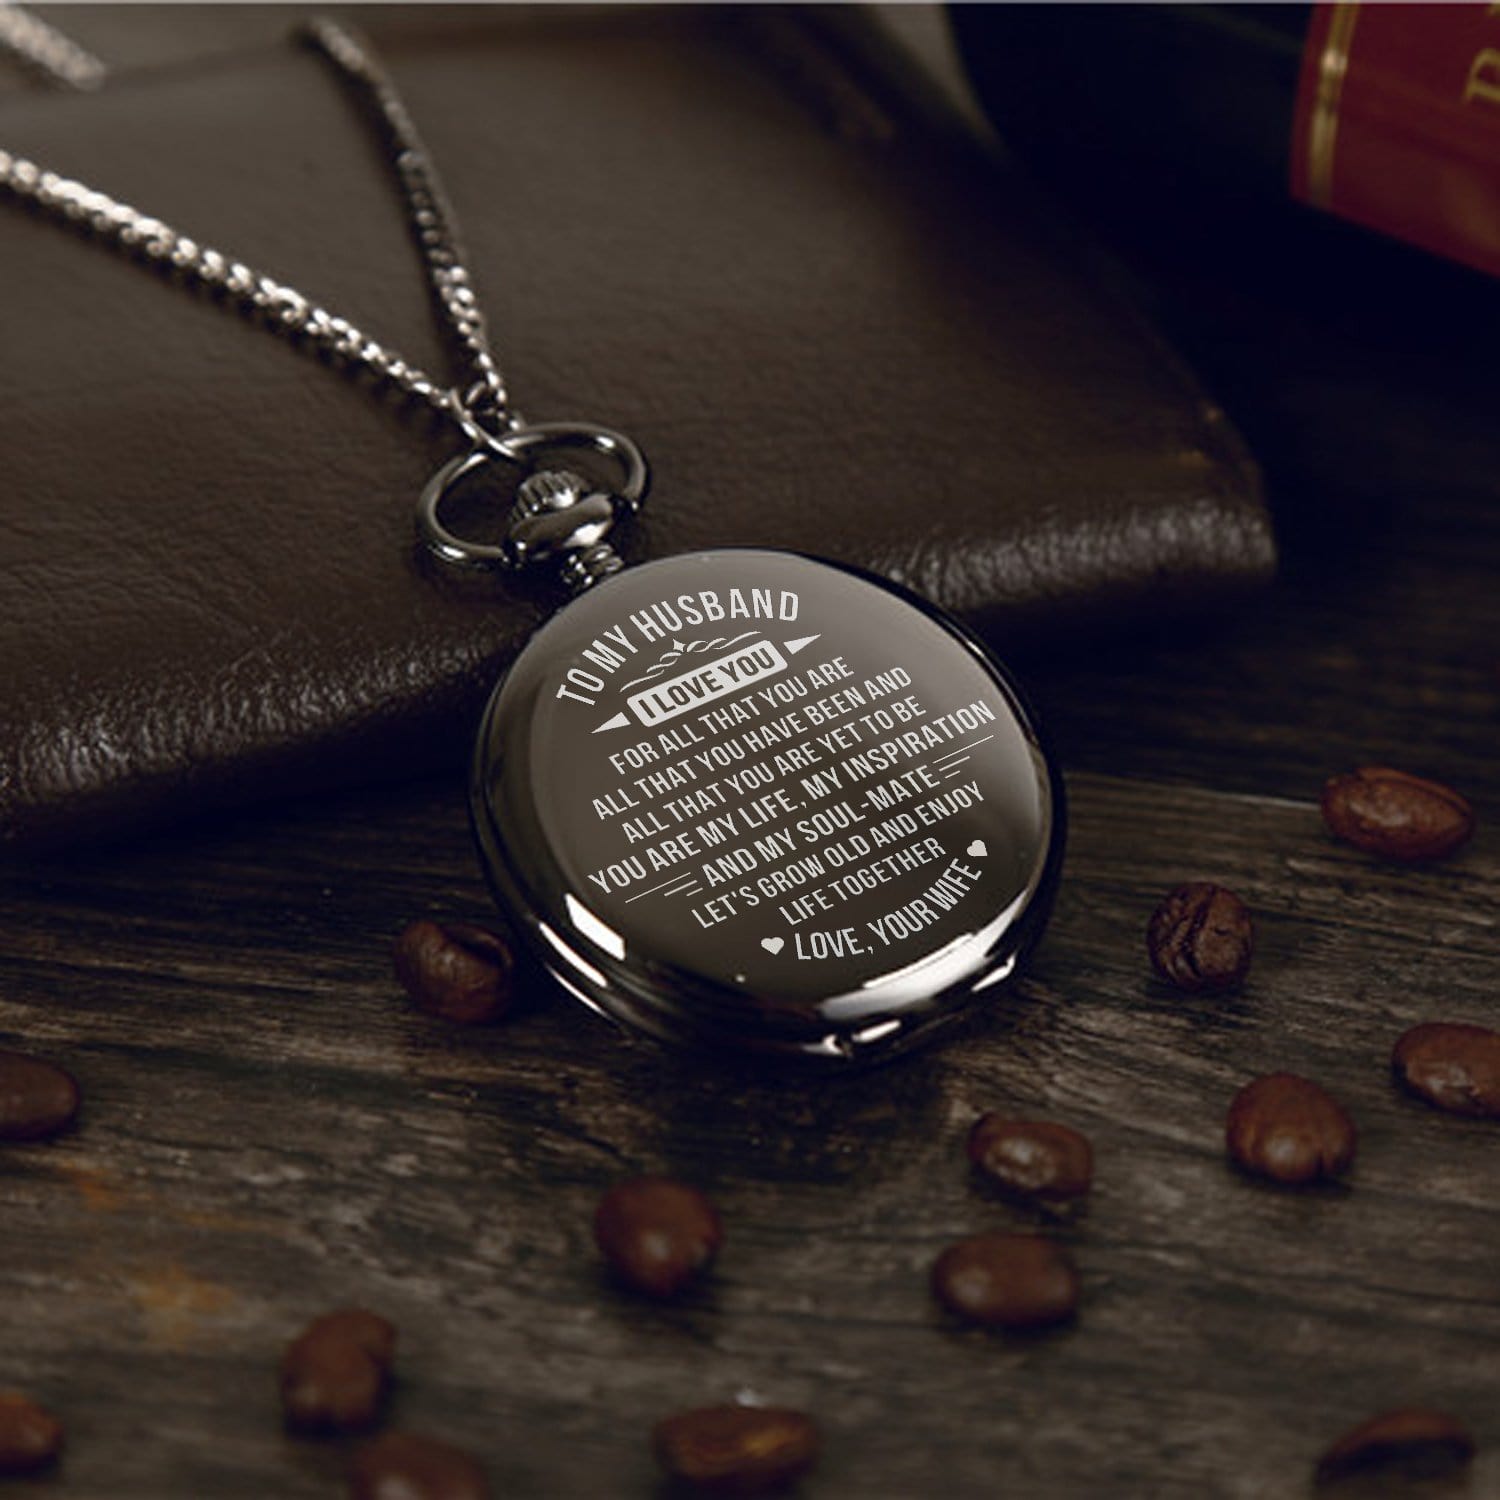 Pocket Watches To My Husband - Enjoy Life Together Pocket Watch GiveMe-Gifts